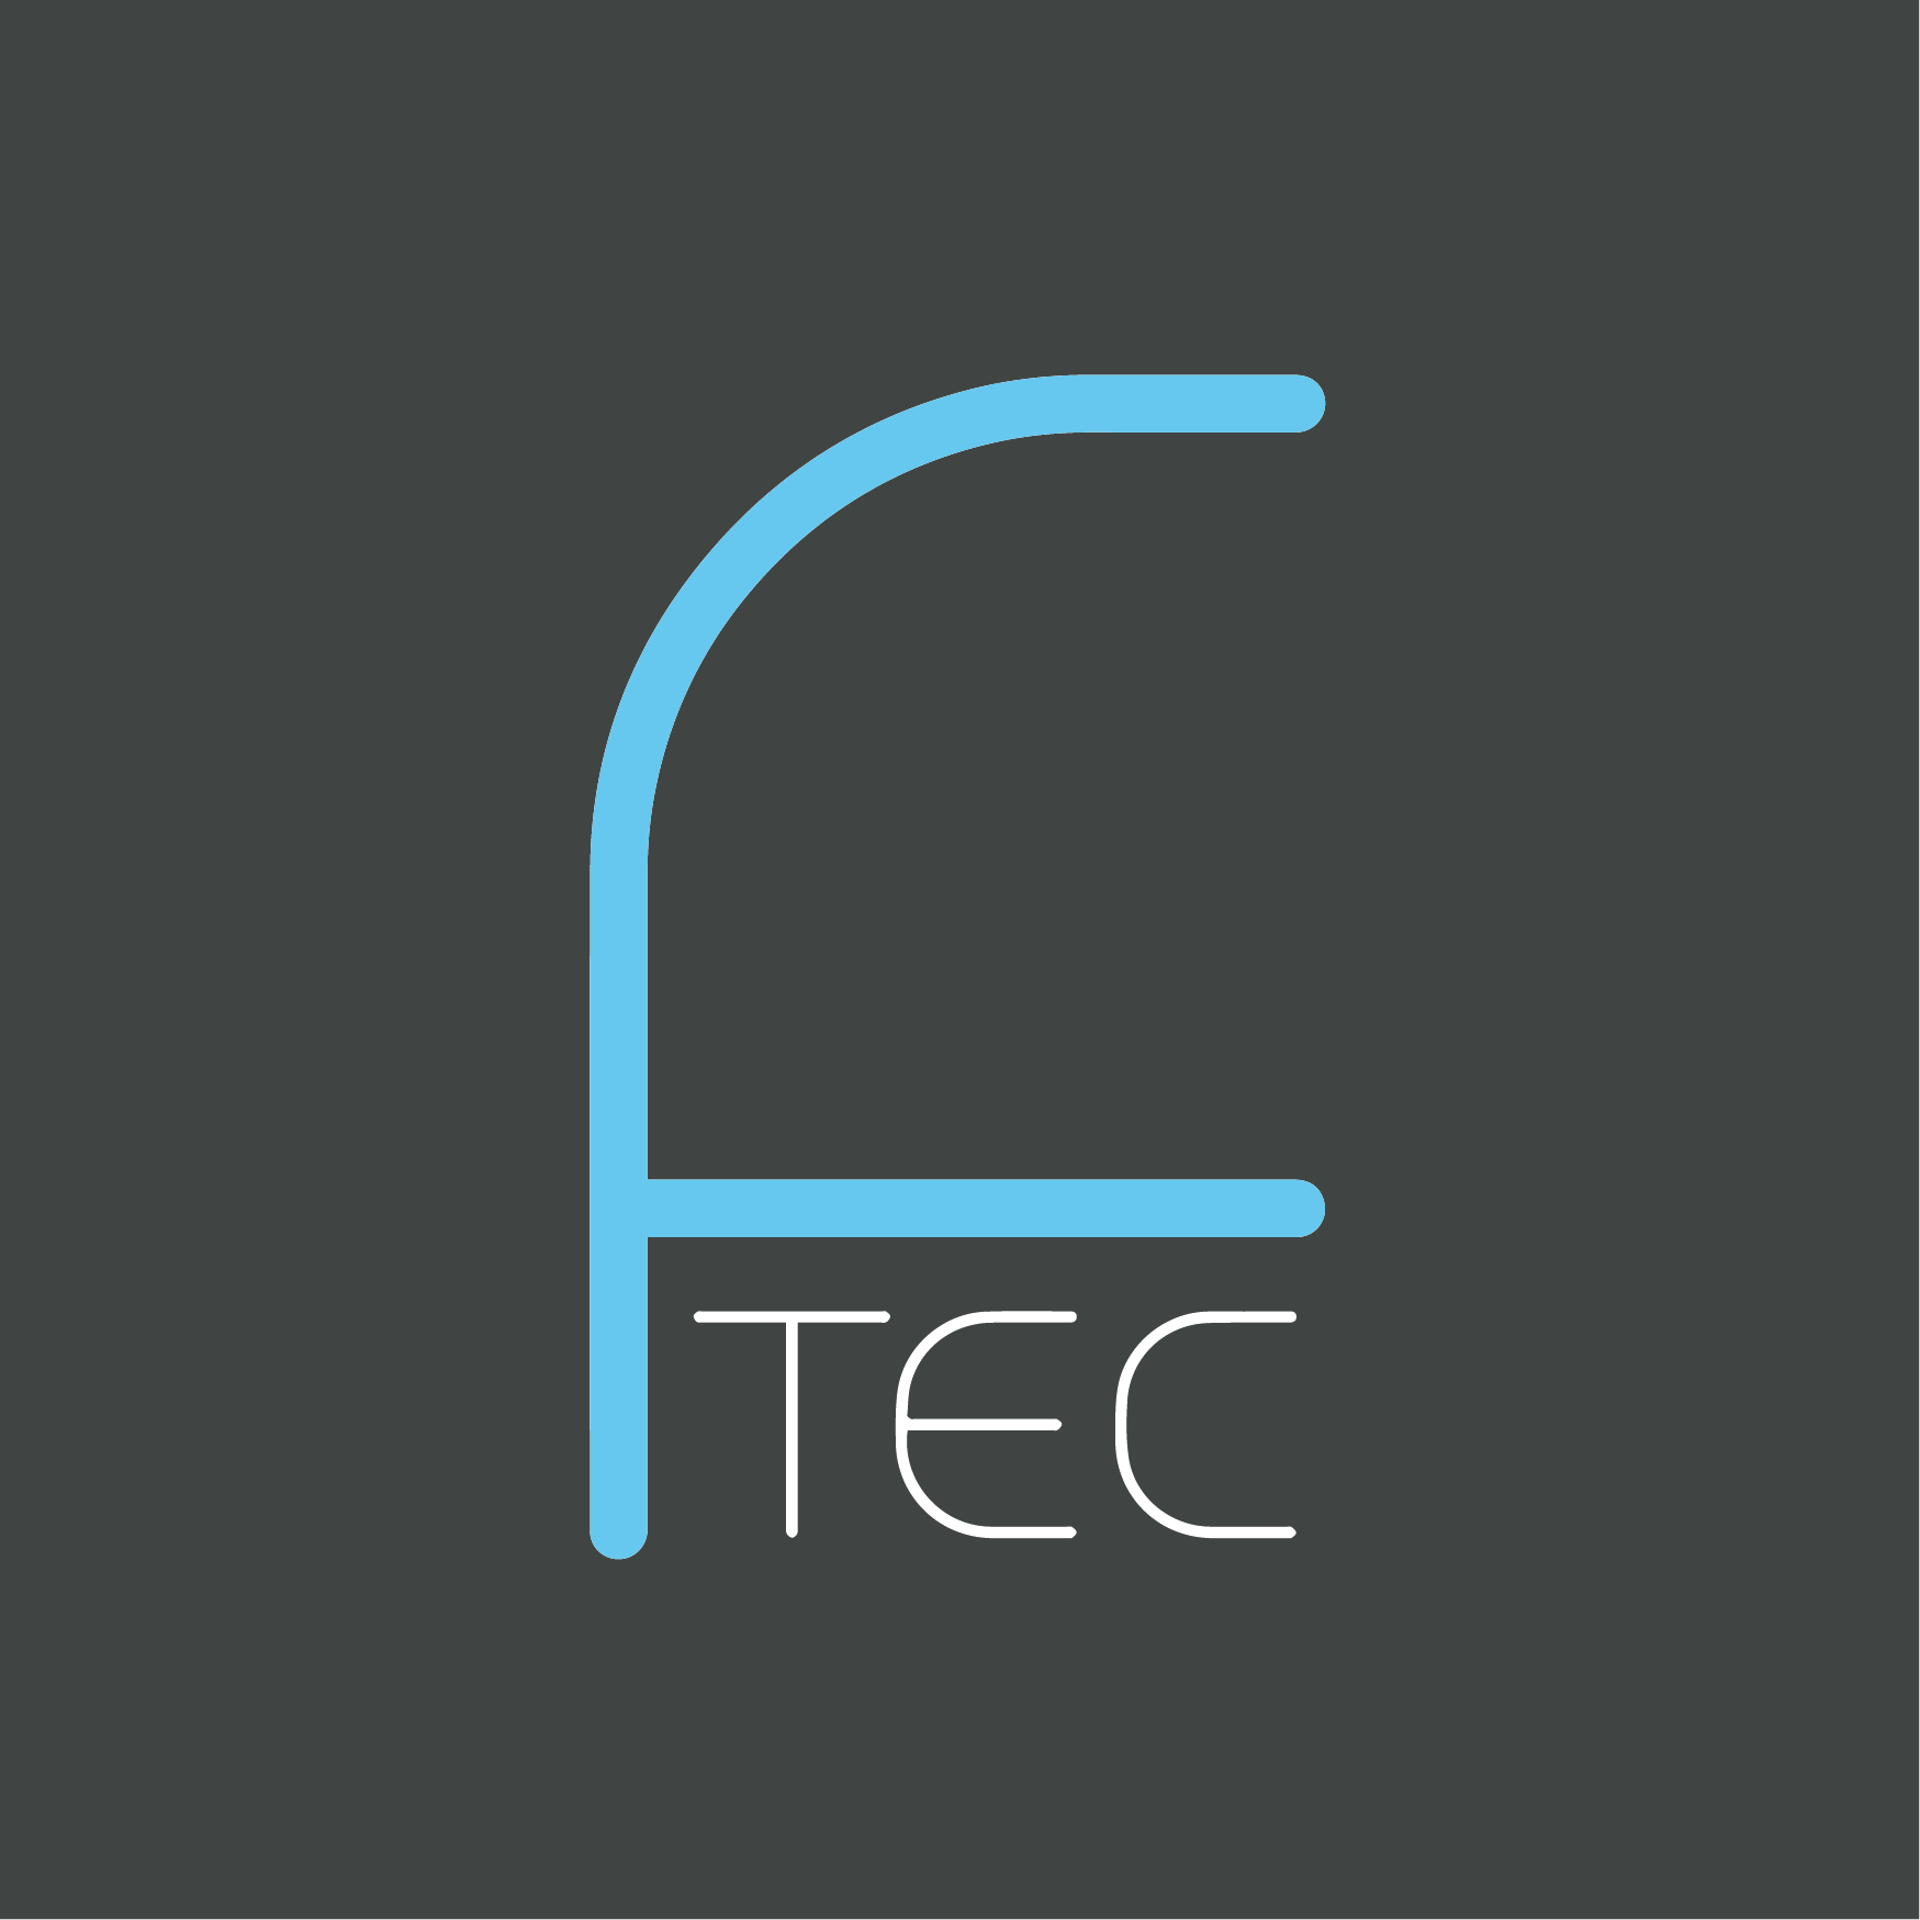 A grey background logo for FTEC